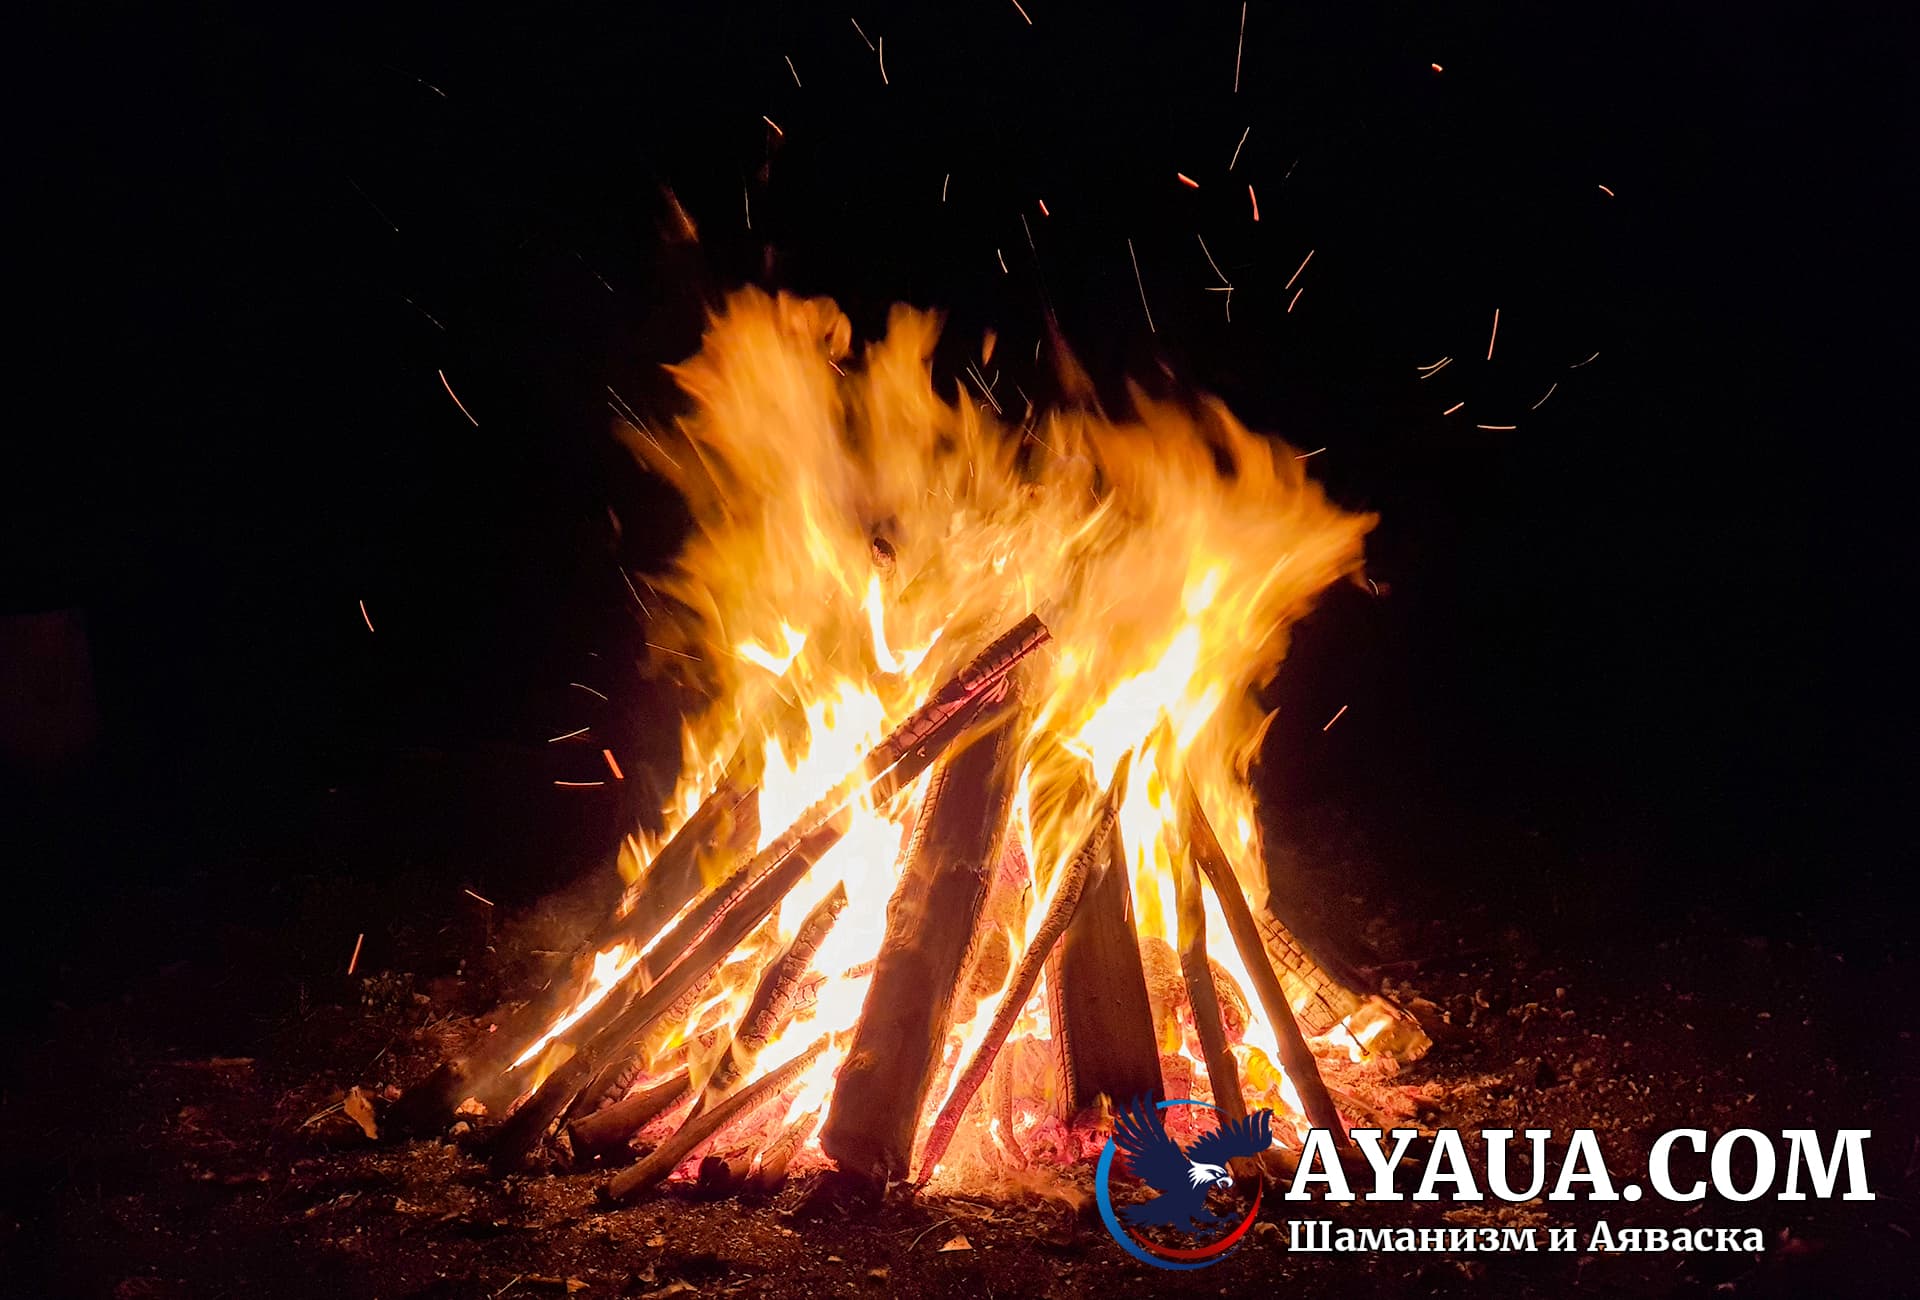 A bonfire in Mexico, where stones are heated for conducting the sacred Temazcal ceremony.